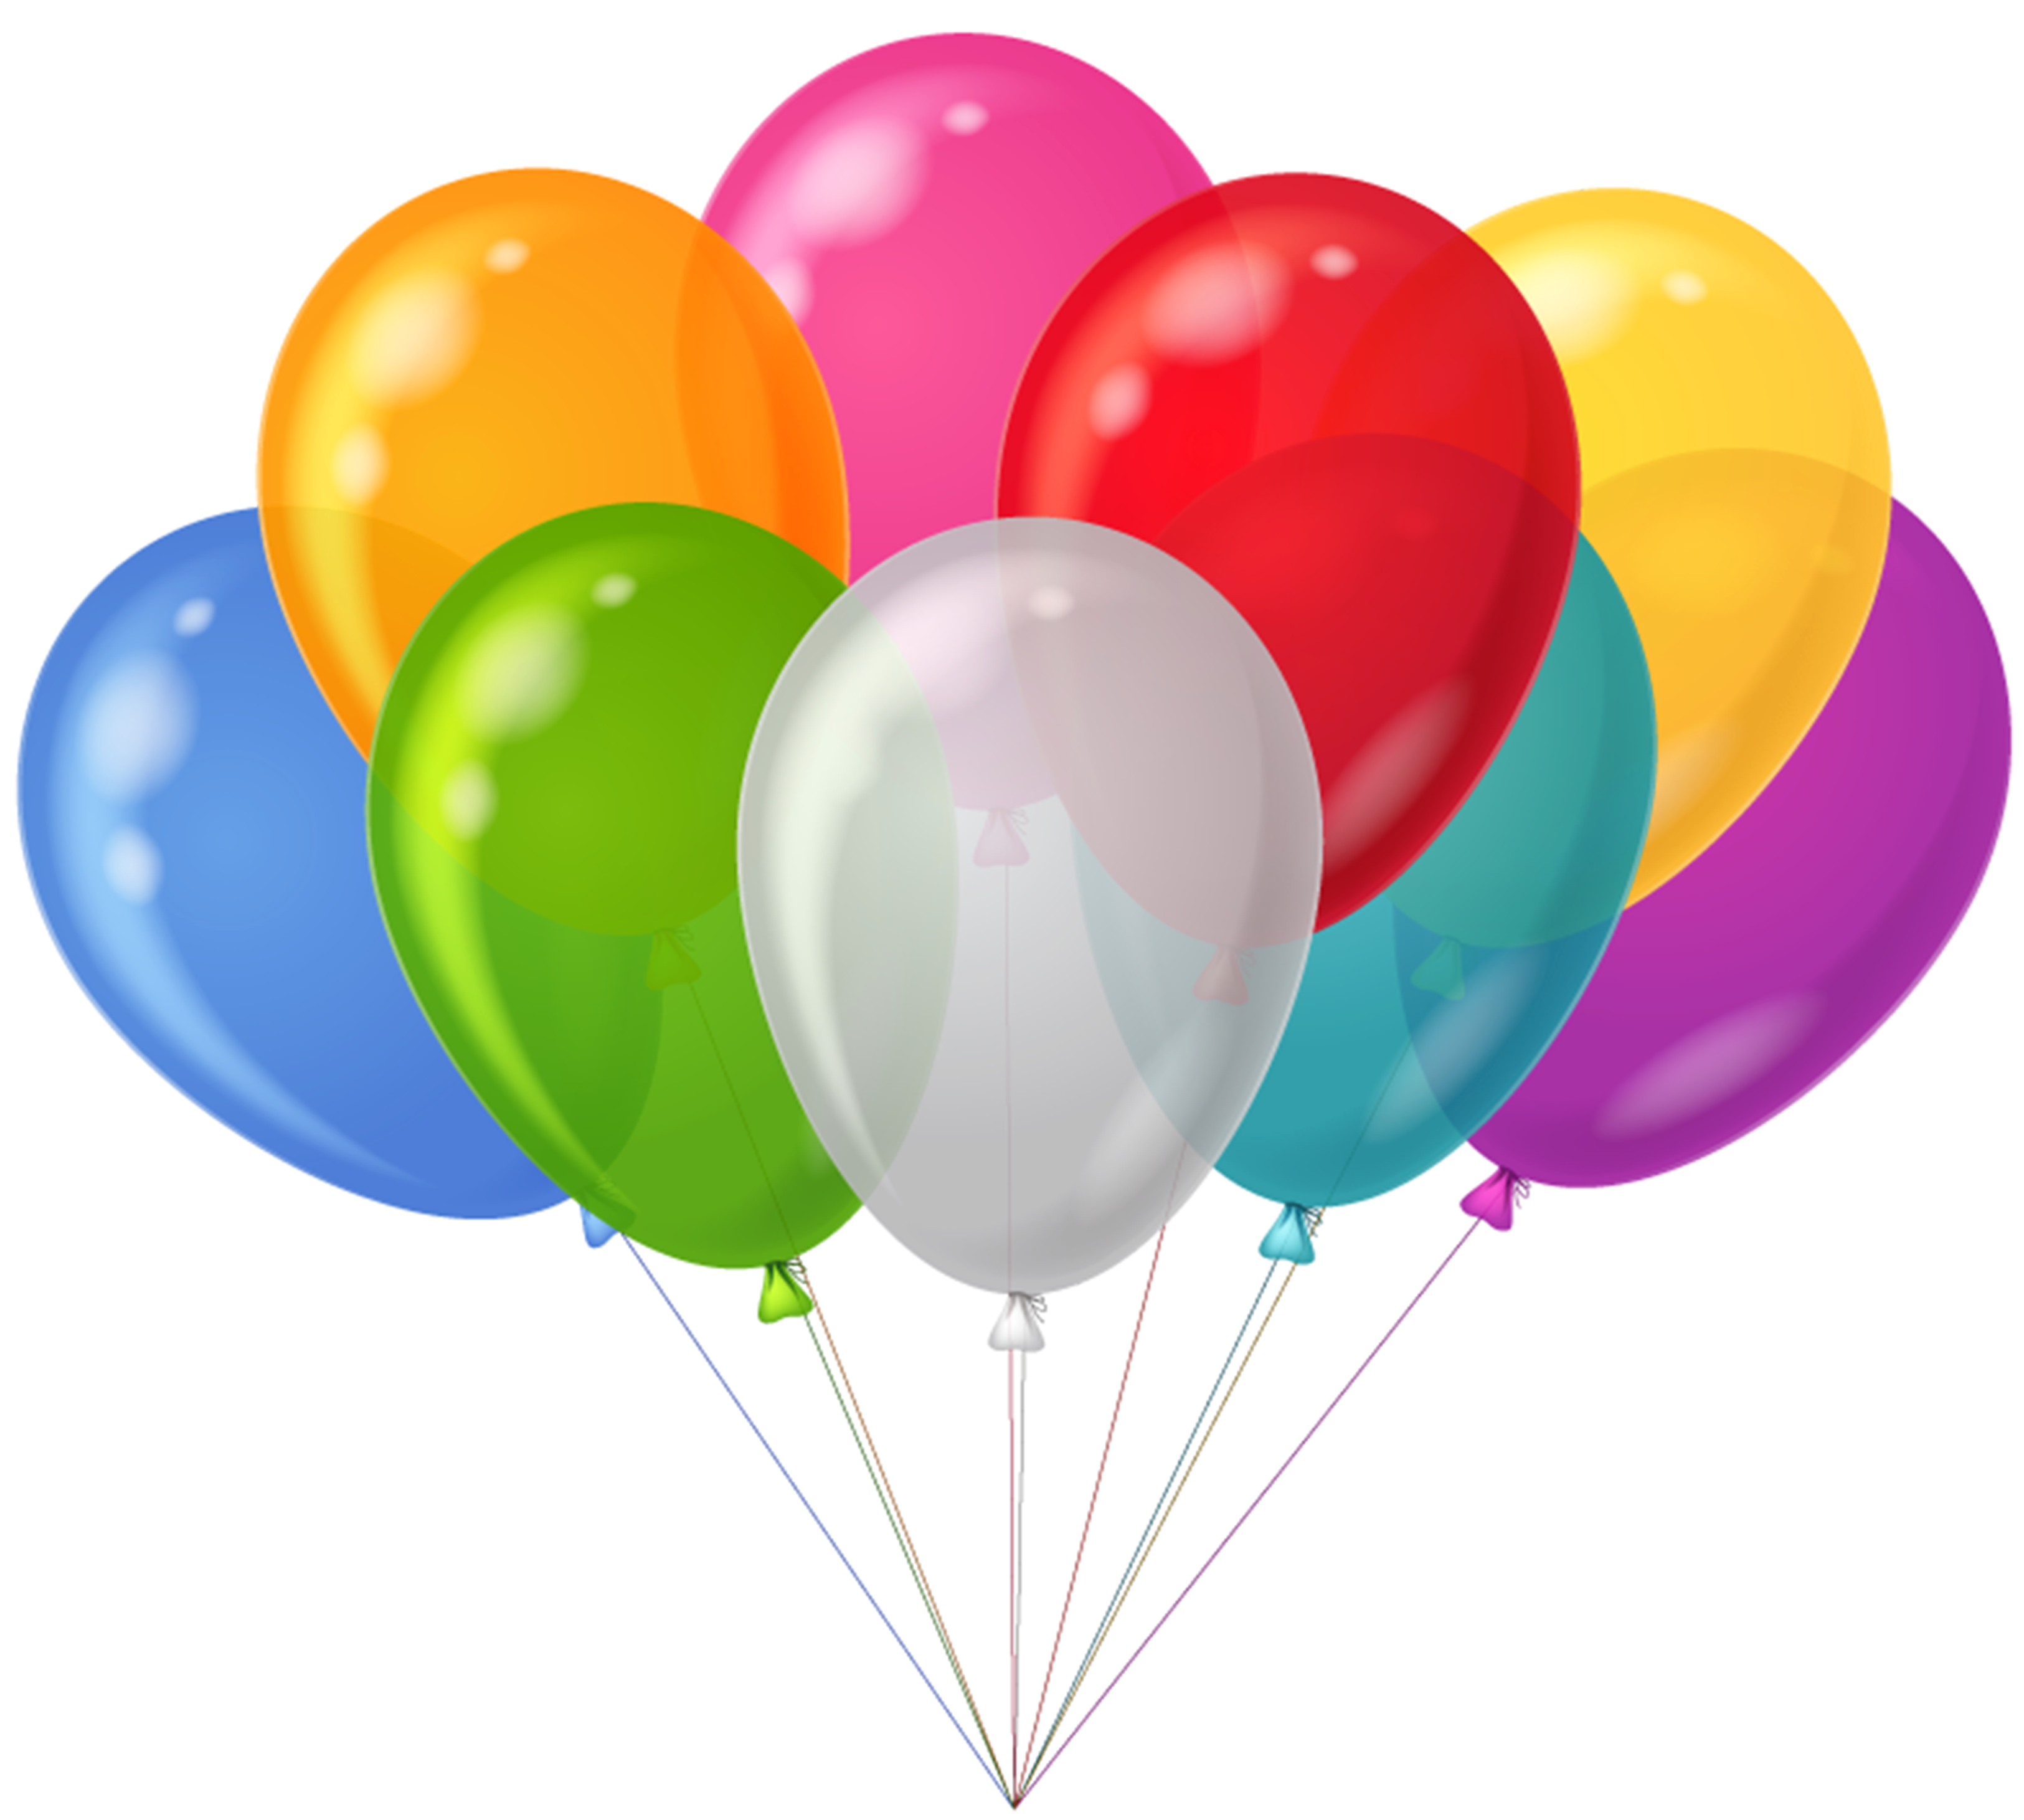 Bunch Transparent Colorful Balloons Clipart - ClipArt Best ...